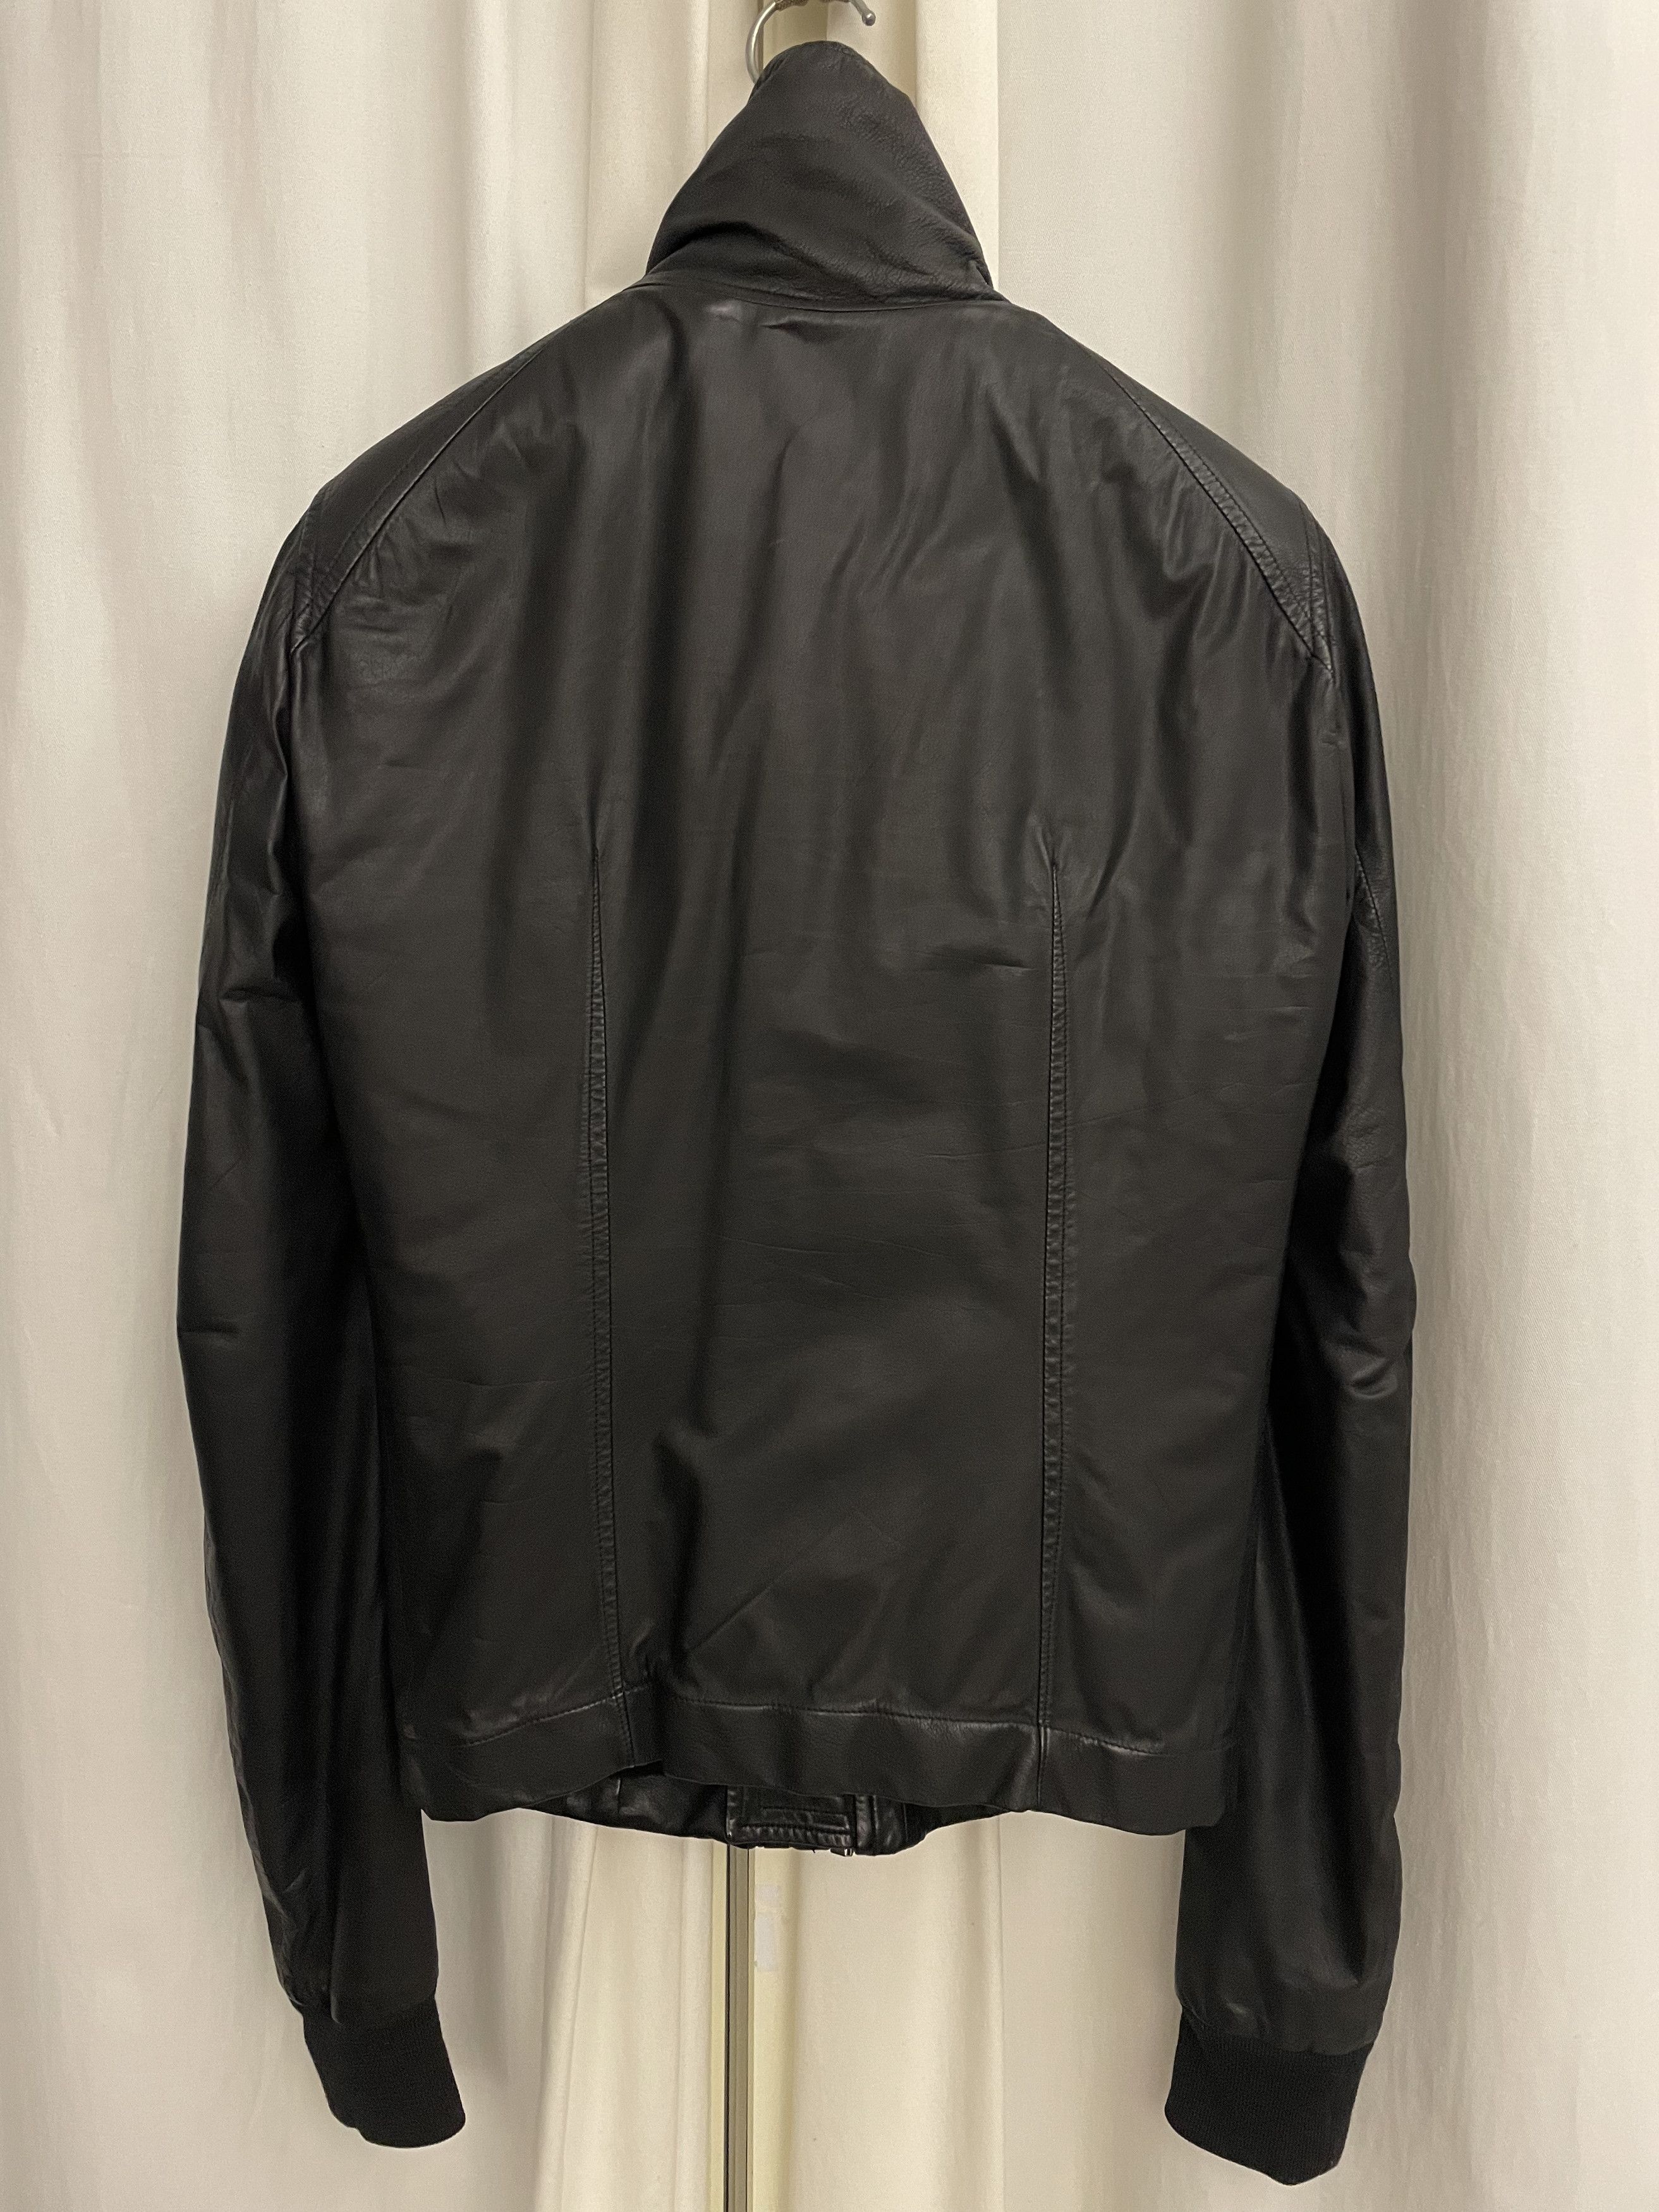 Rick Owens Calf leather Intarsia jacket 46 thick lining | Grailed